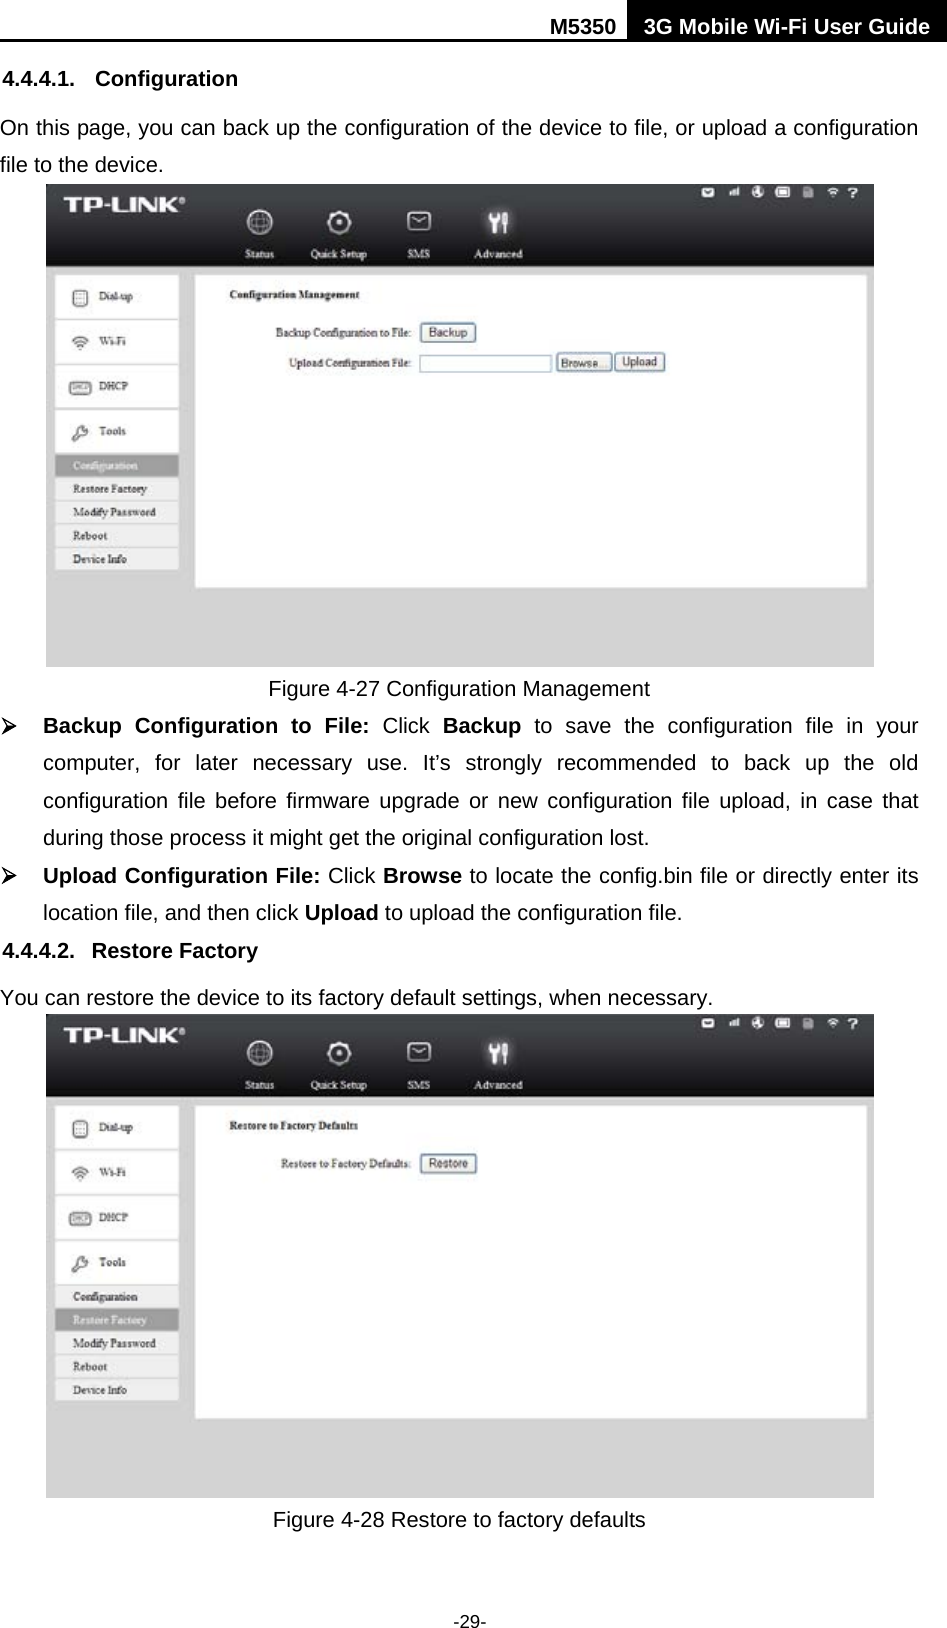 M5350 3G Mobile Wi-Fi User Guide  -29- 4.4.4.1. Configuration On this page, you can back up the configuration of the device to file, or upload a configuration file to the device.  Figure 4-27 Configuration Management  Backup  Configuration to File: Click  Backup  to save the configuration file in your computer, for later necessary use. It’s strongly recommended to back up the old configuration file before firmware upgrade or new configuration file upload, in case that during those process it might get the original configuration lost.  Upload Configuration File: Click Browse to locate the config.bin file or directly enter its location file, and then click Upload to upload the configuration file. 4.4.4.2. Restore Factory You can restore the device to its factory default settings, when necessary.  Figure 4-28 Restore to factory defaults 